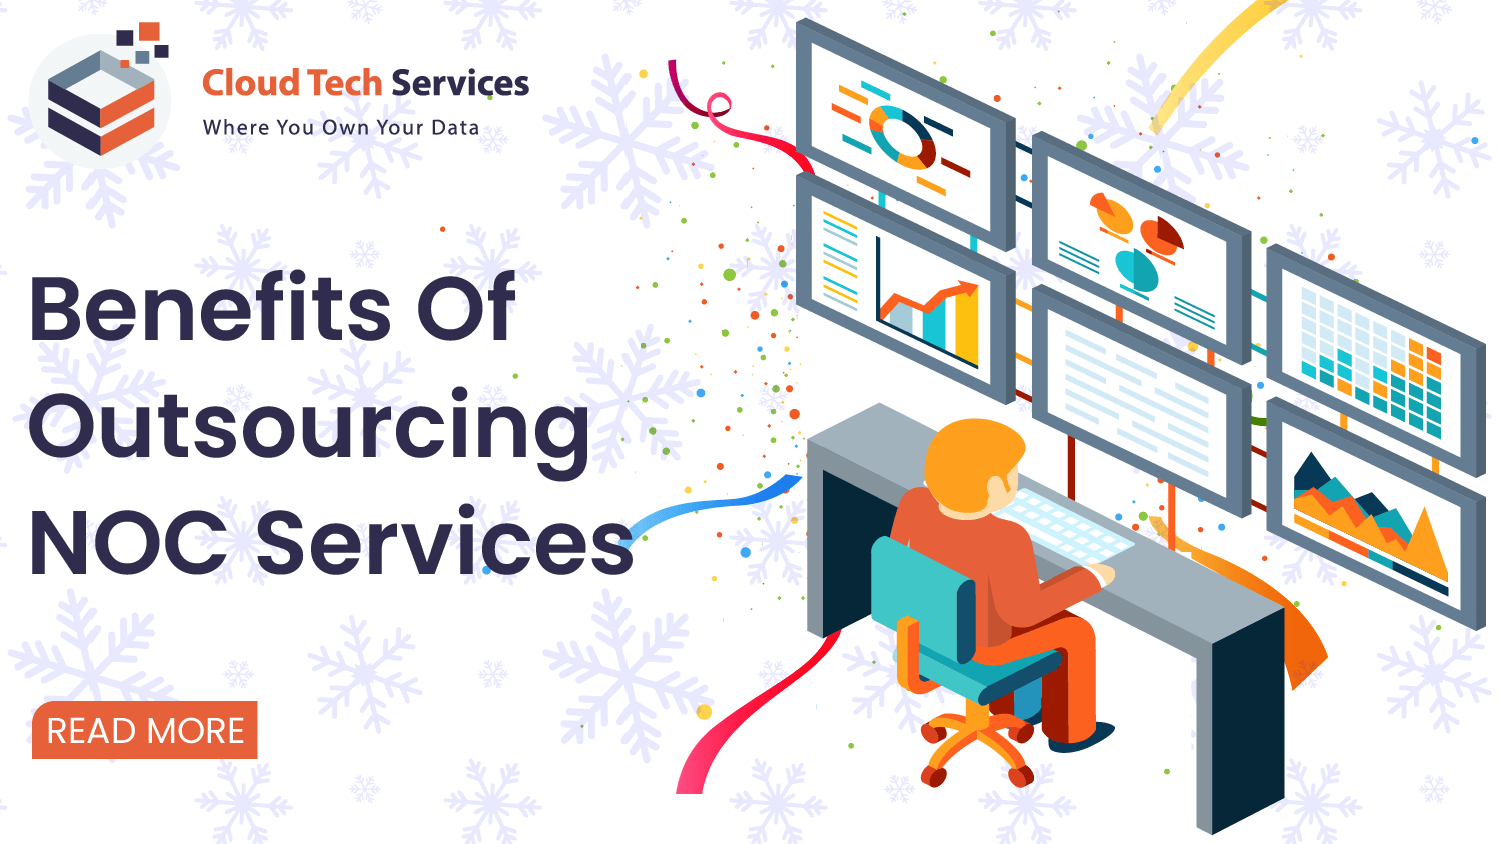 Benefits of outsourcing NOC services